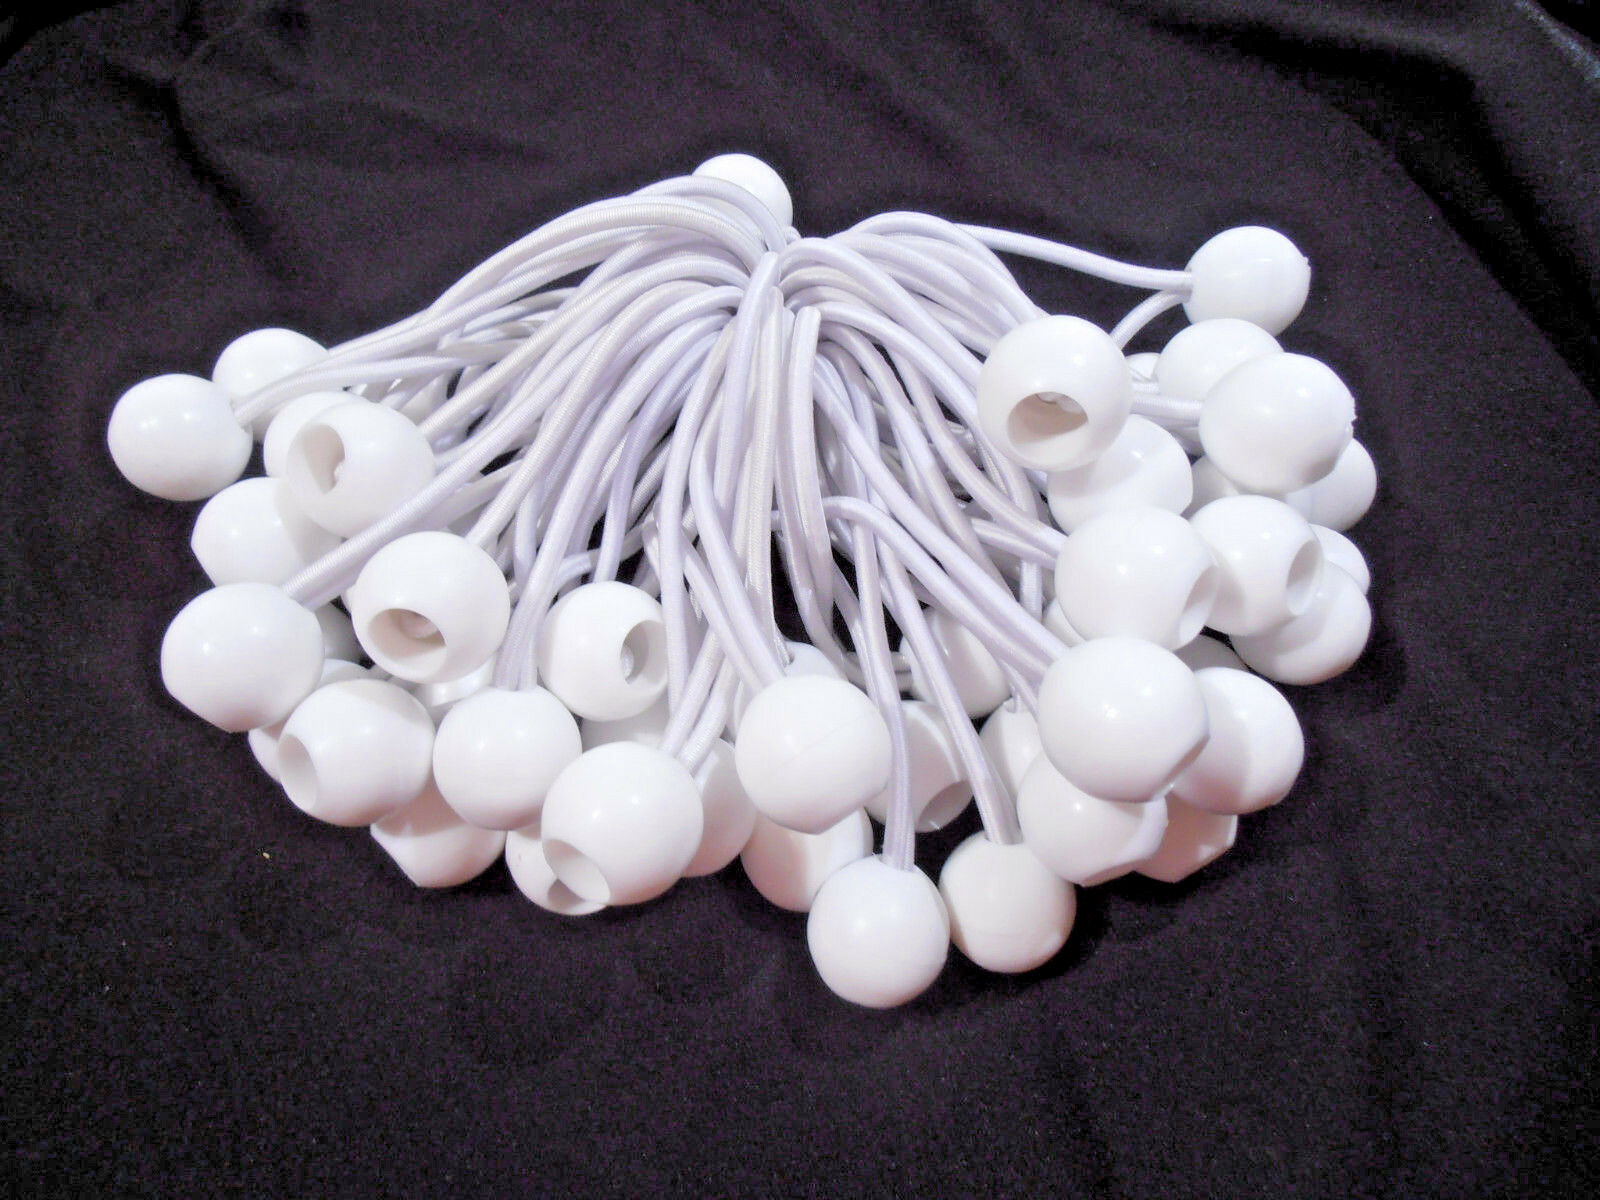 Ball Bungee Cord 100 Pc.  6" Inch White Tie Down Strap Canopy Accessory Bungie